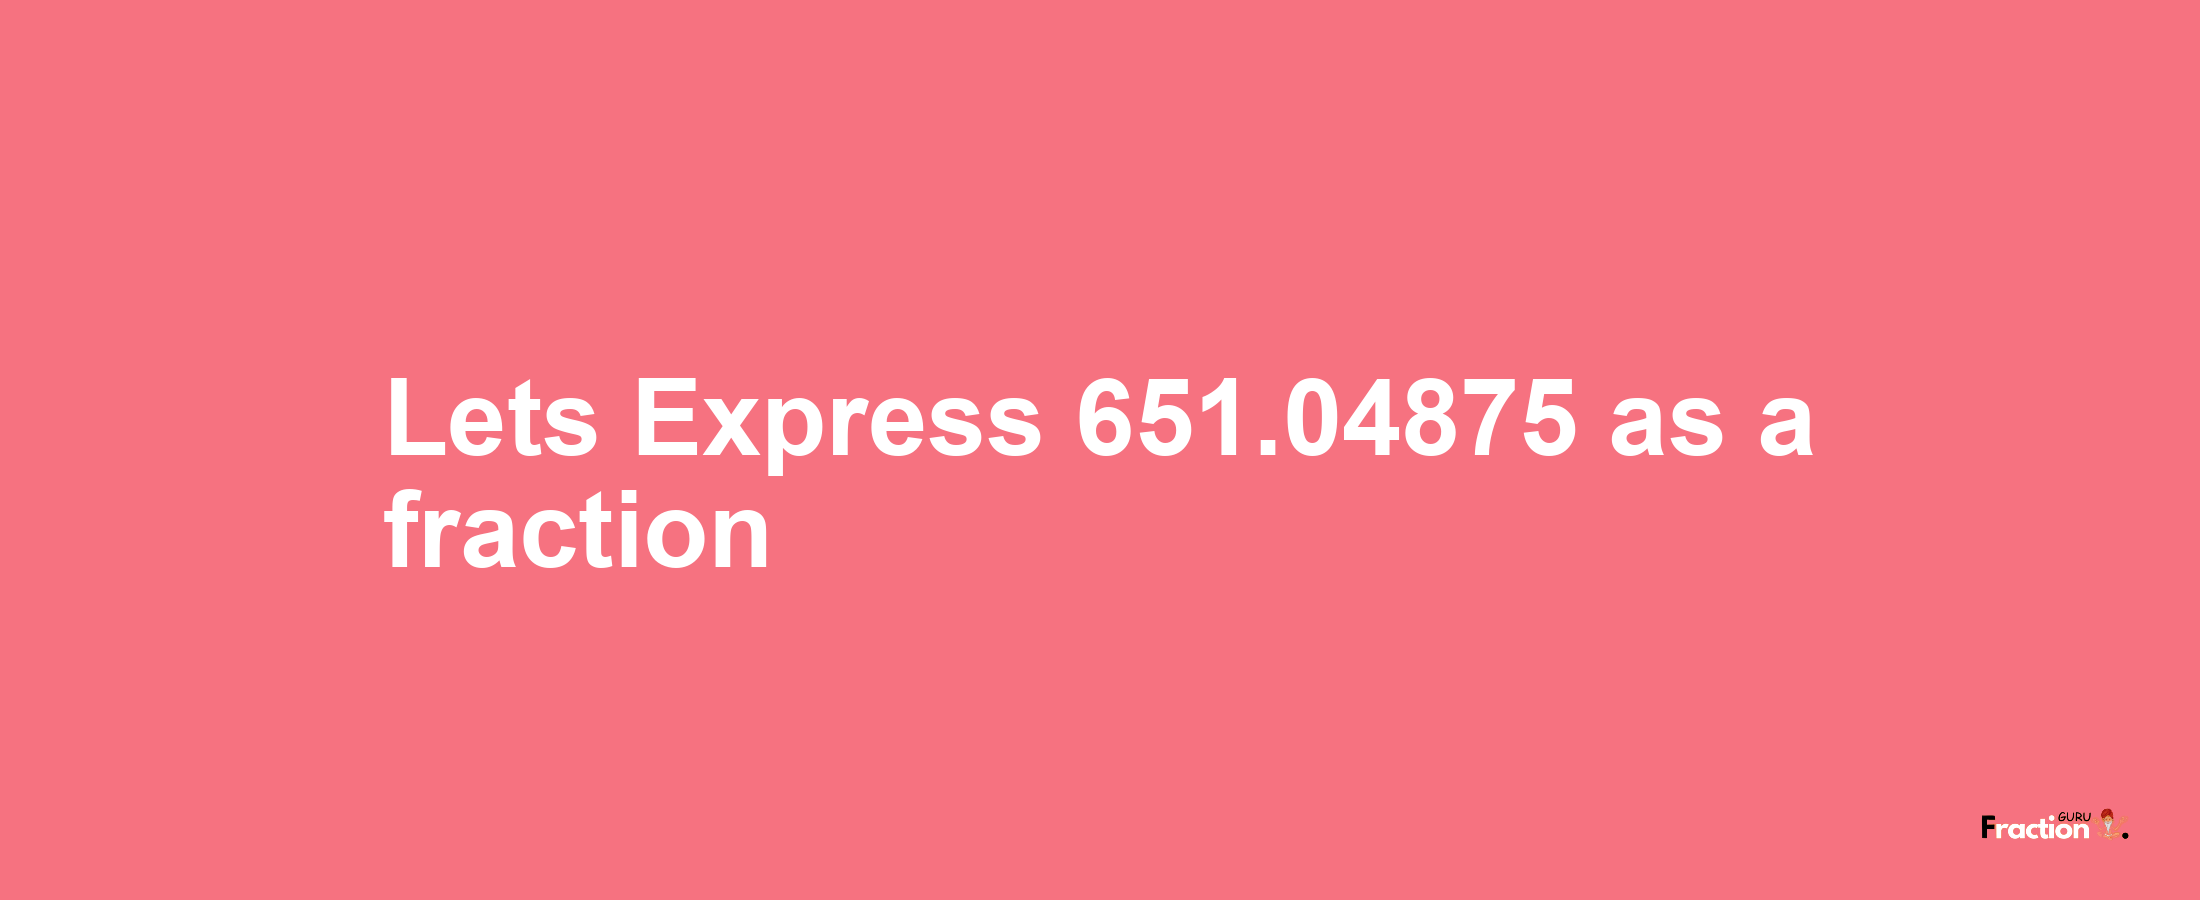 Lets Express 651.04875 as afraction